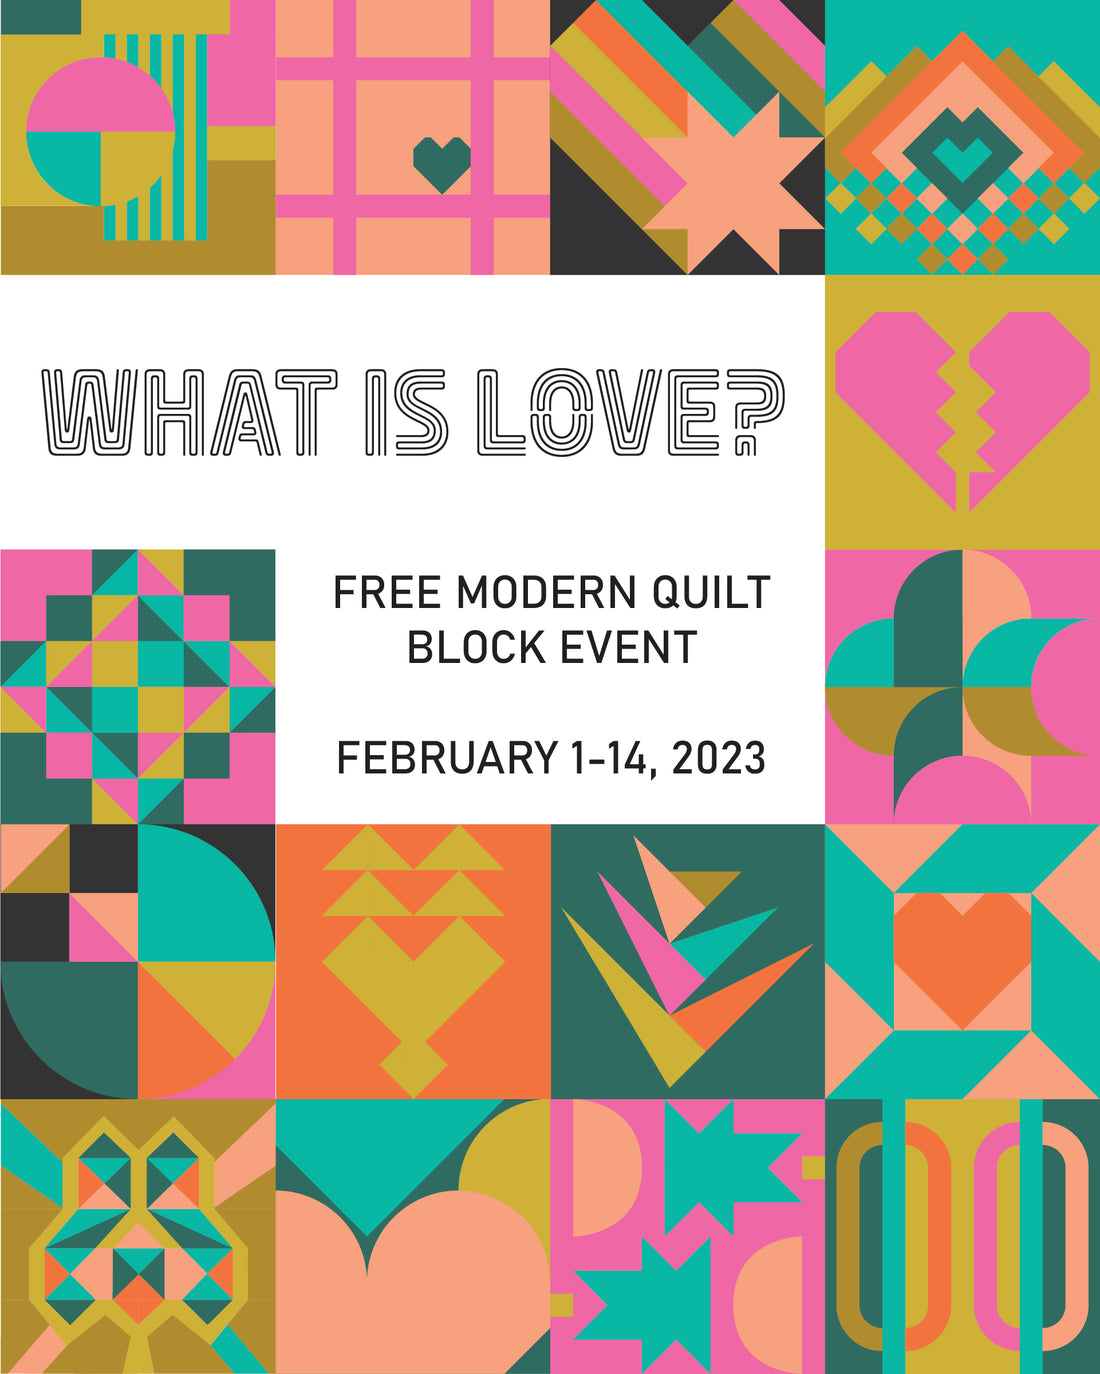 What is Love? A FREE modern quilt block event.